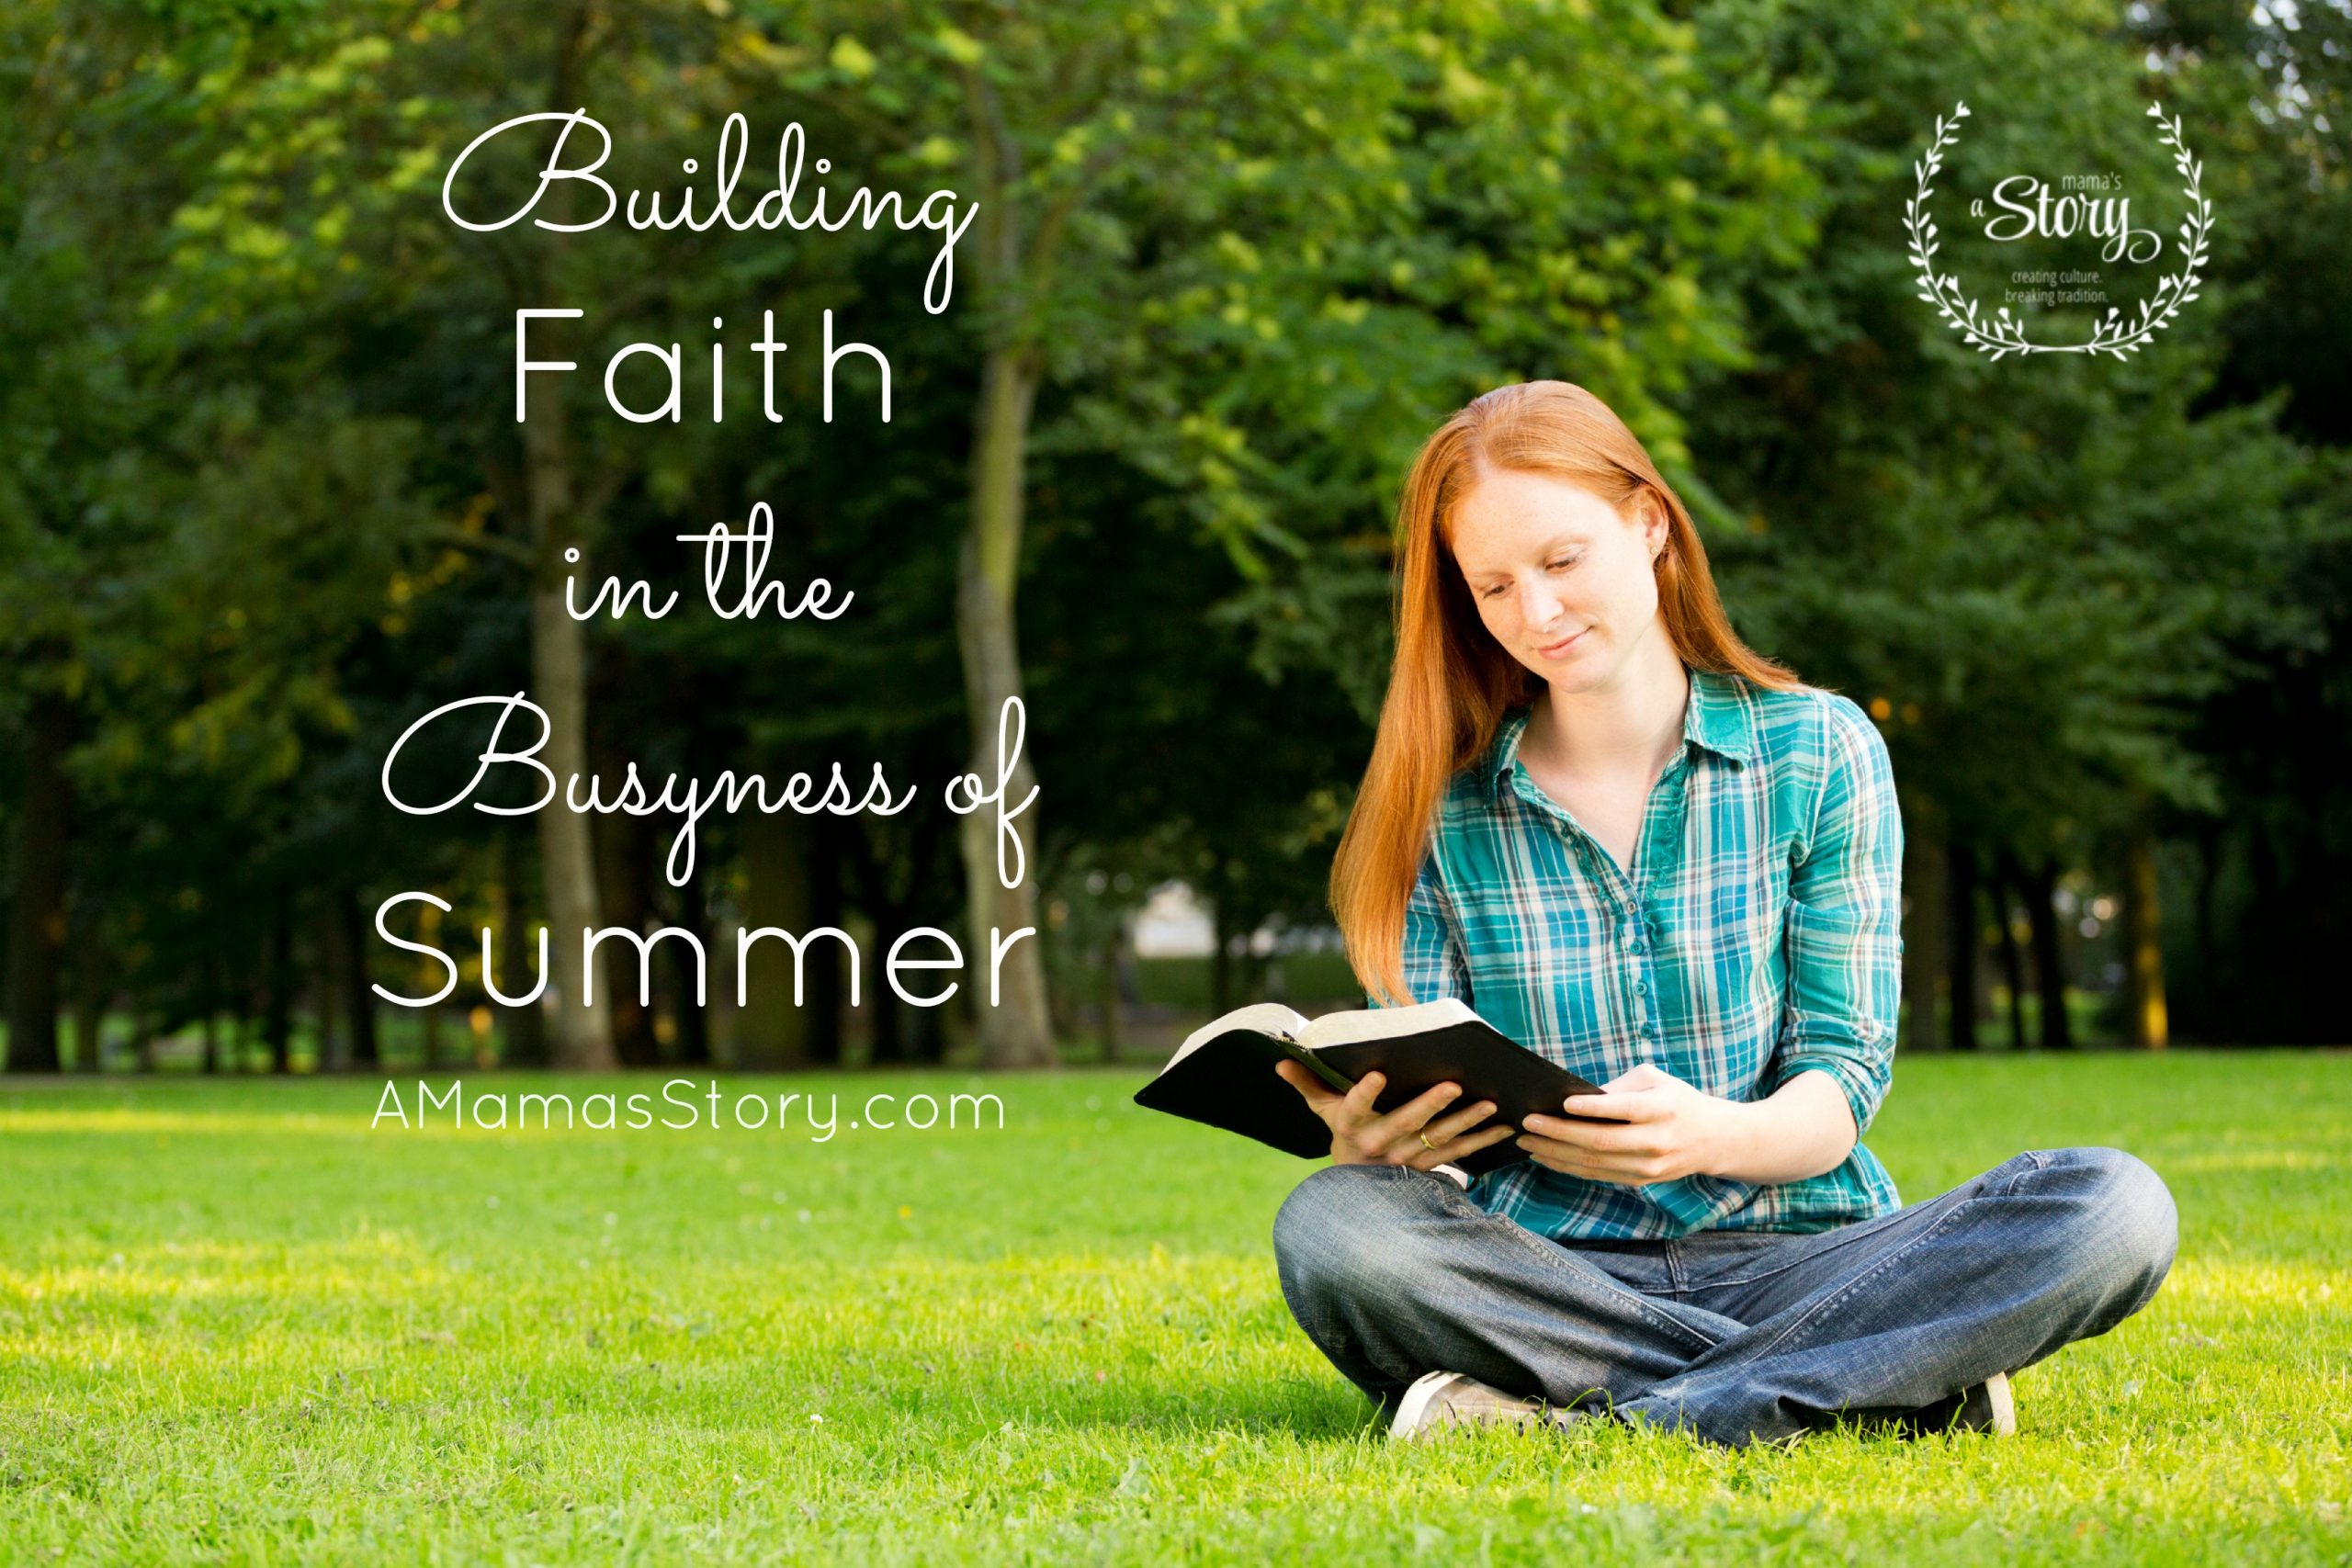 Building Faith in the Busyness of Summer